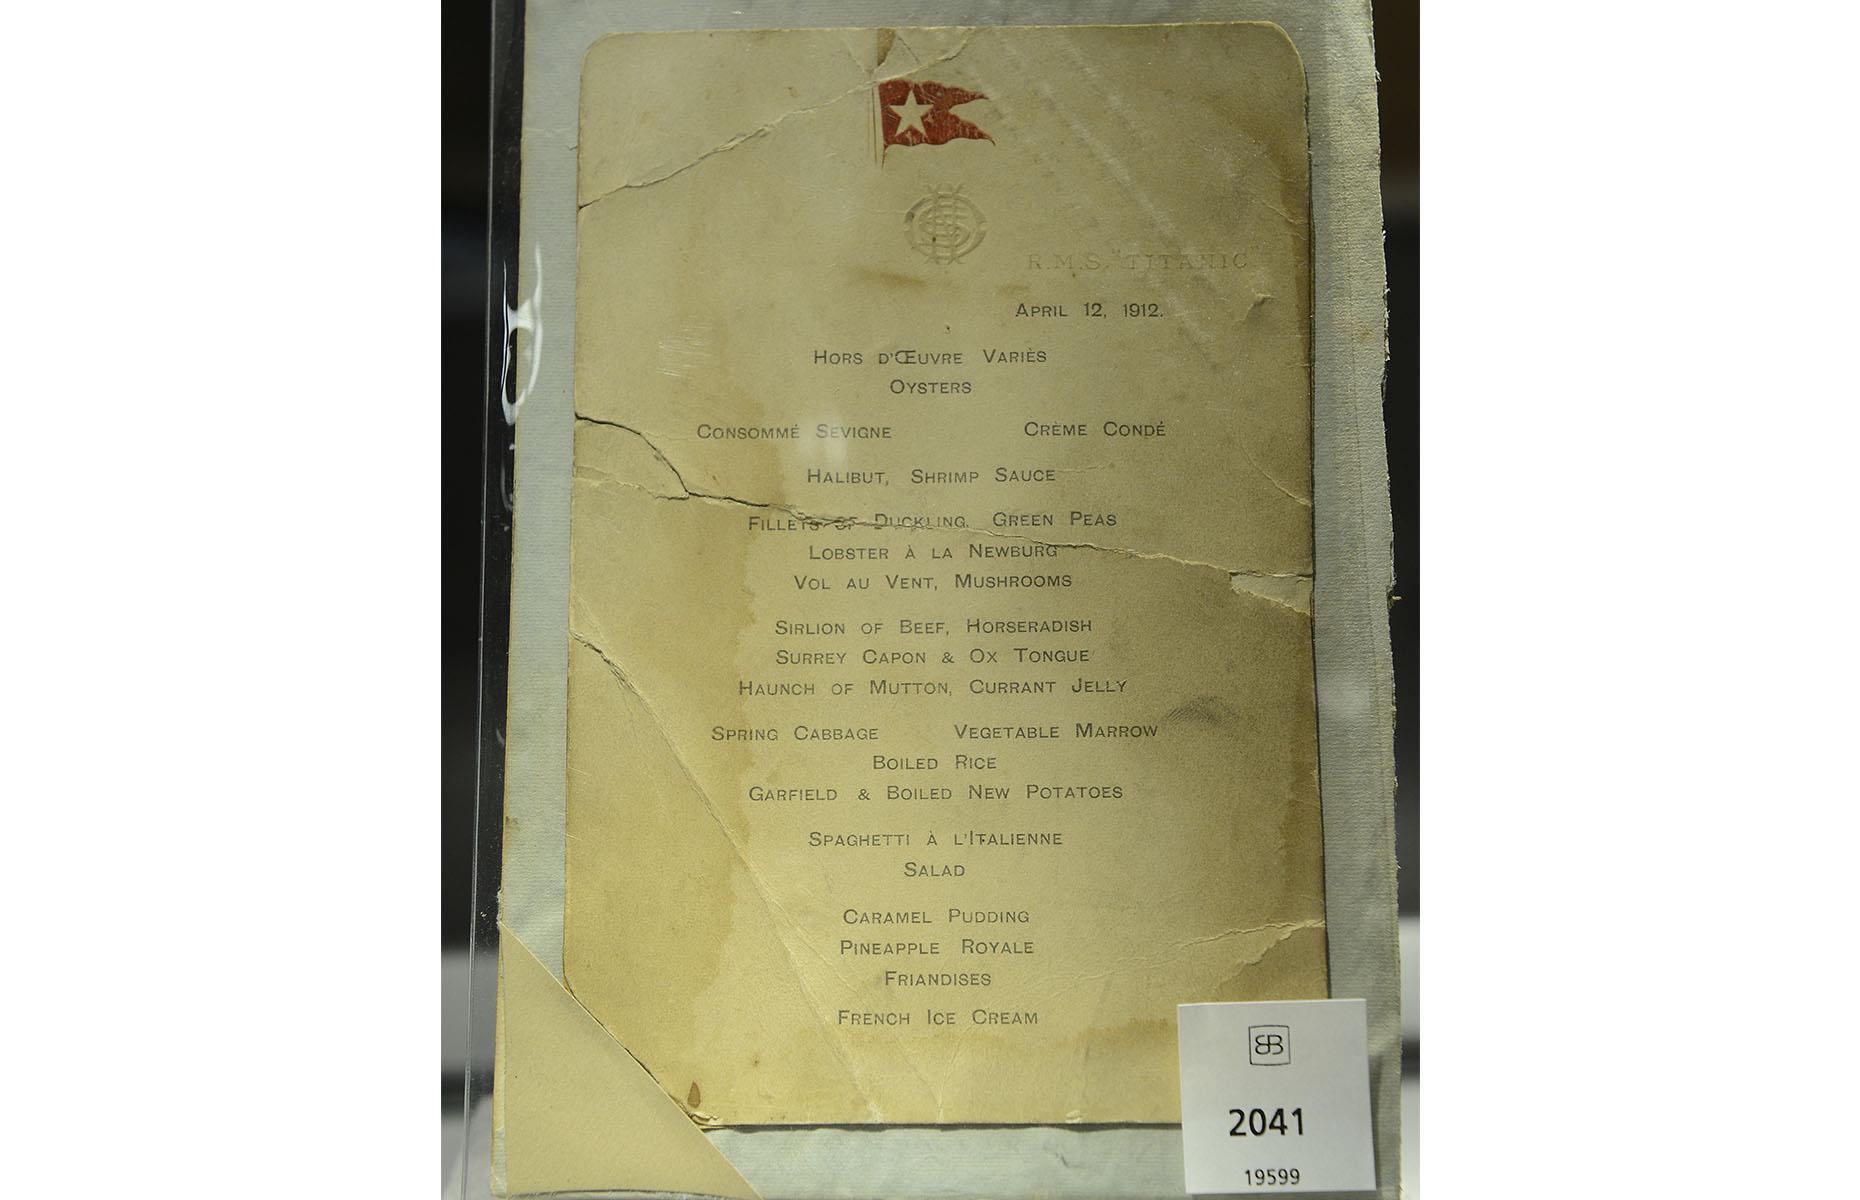 People remain in awe of the Titanic, especially its glamor and opulence, so when a first-class menu of the first lunch aboard the ship went up for auction in 2018 it fetched $131,097 (£100k). Dated 12 April, 1912, it belonged to Second Officer Charles Lightoller. In 2012 the last lunch menu sold for $99,670 (£76k). Pictured is a first-class menu on display at Bonhams auction house, New York, 2012.